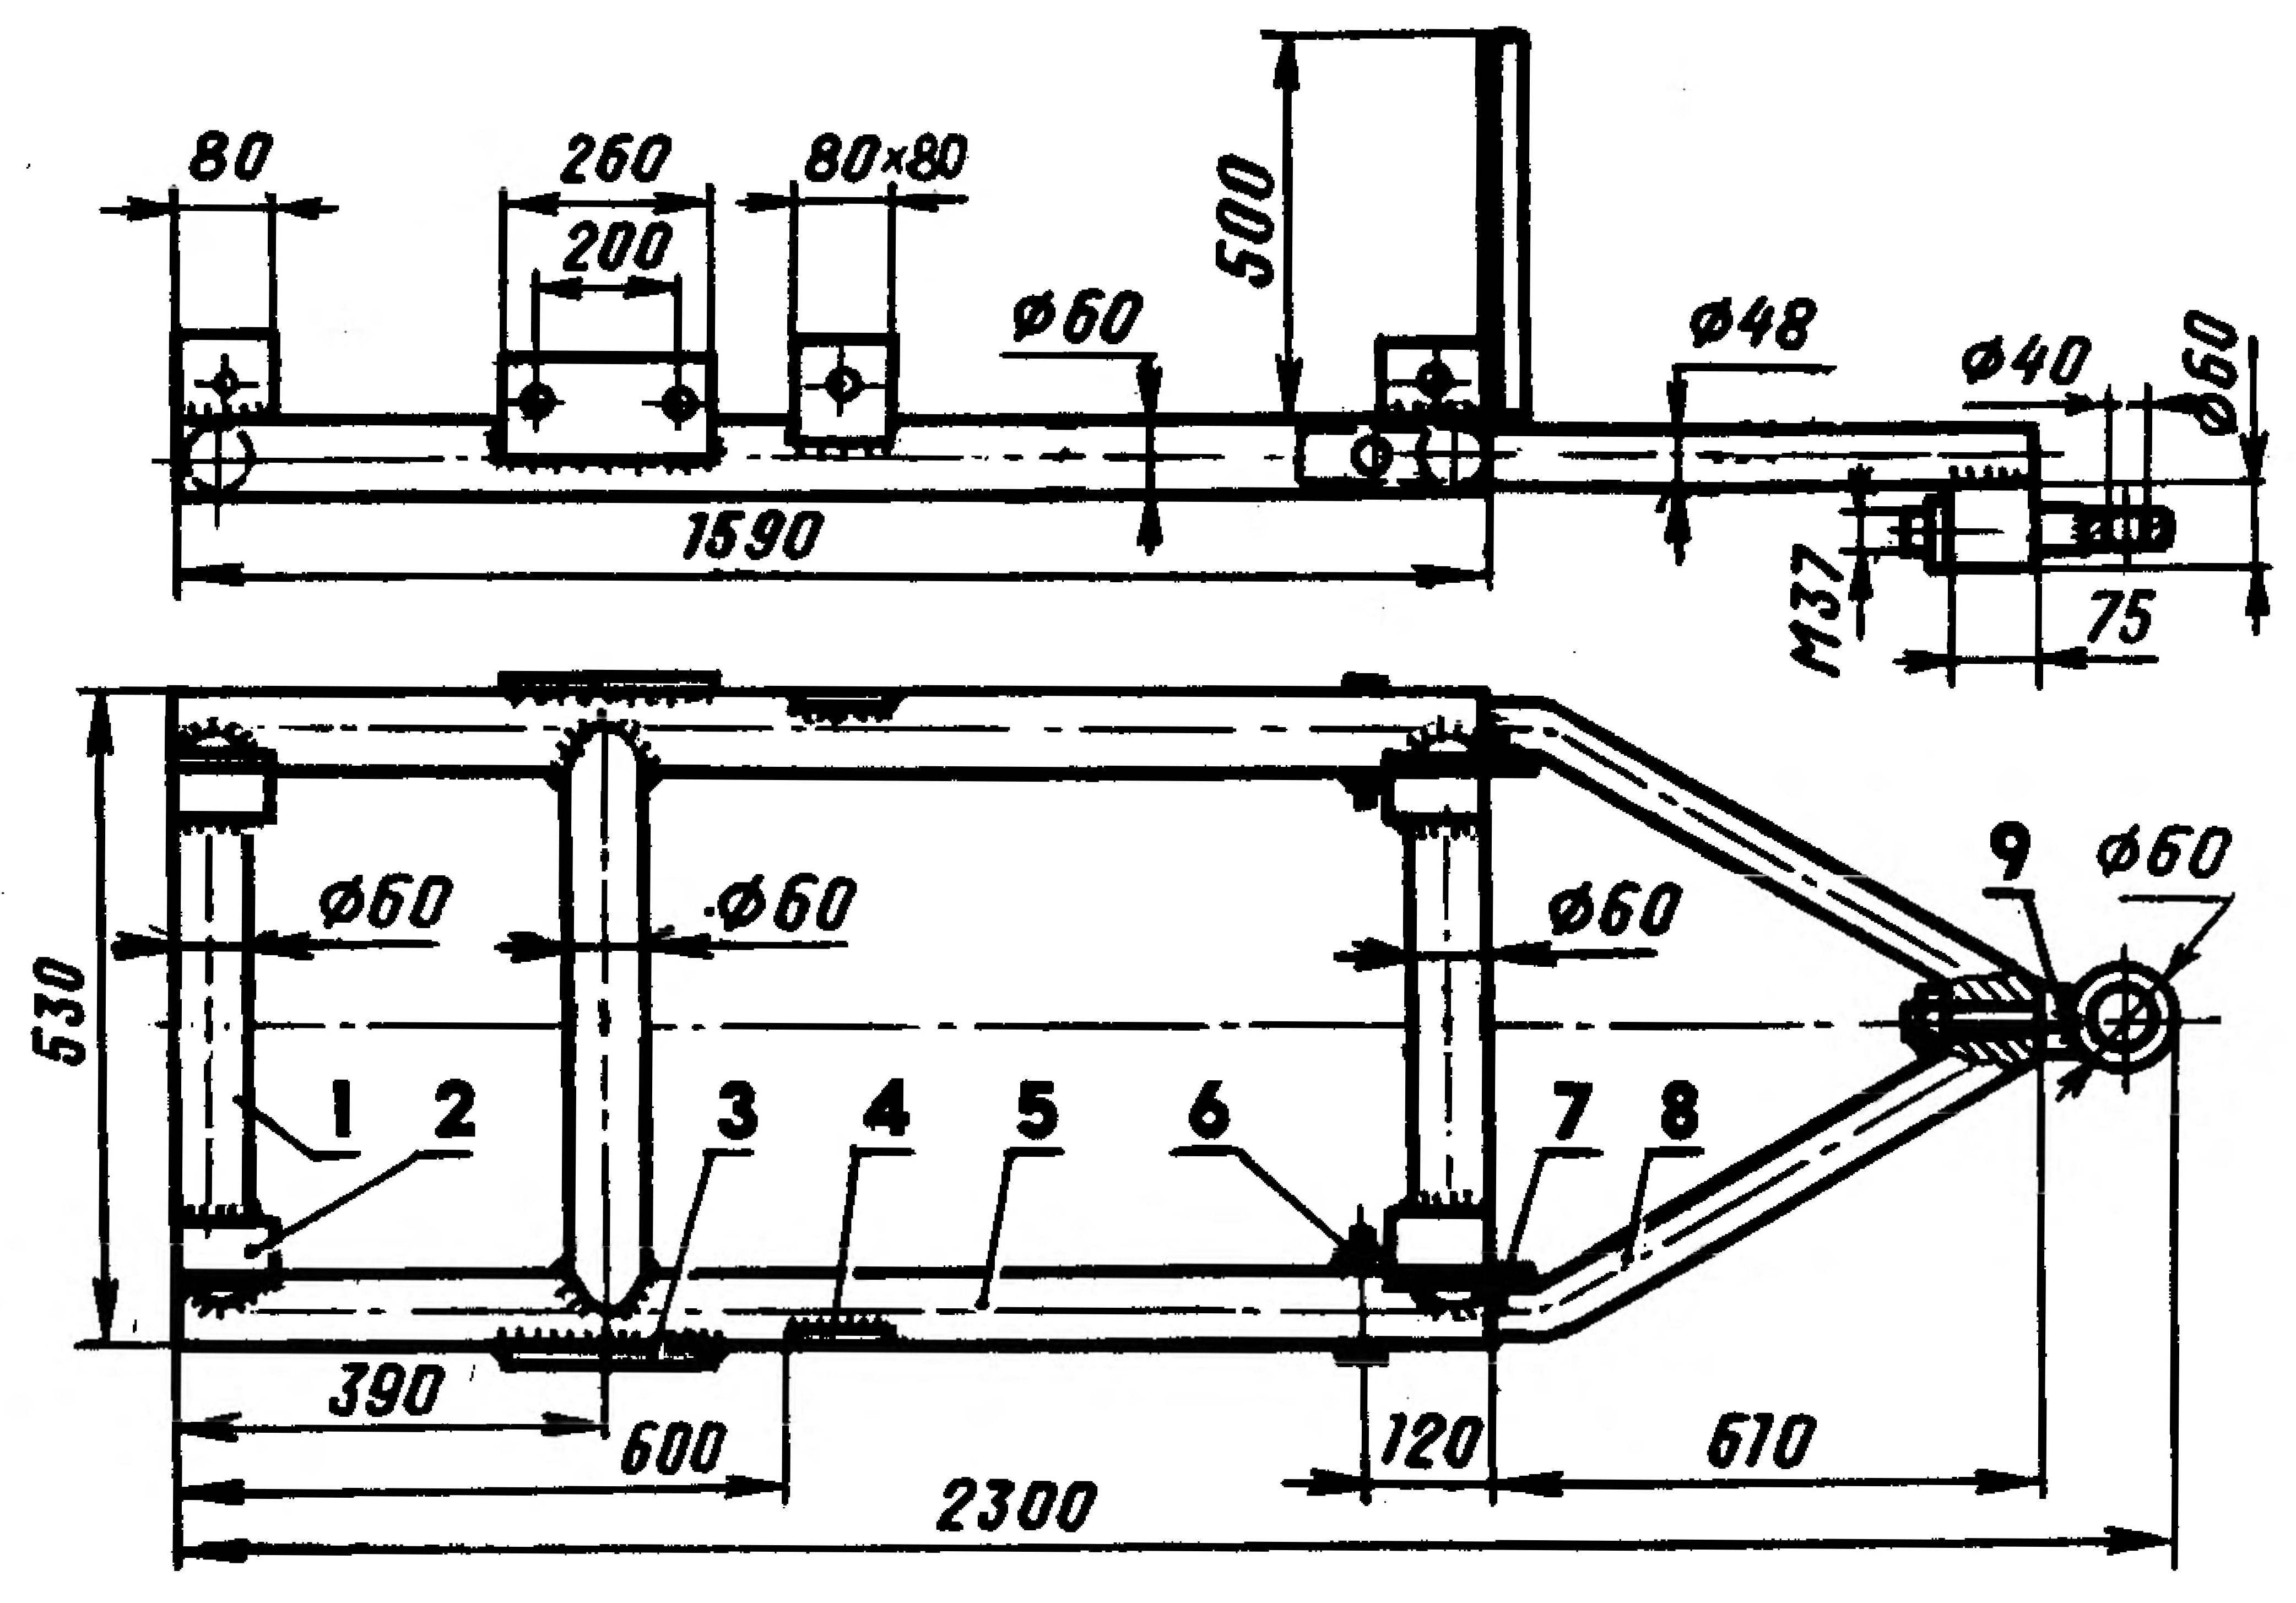 1. The frame of the truck-trailer Assembly with pole